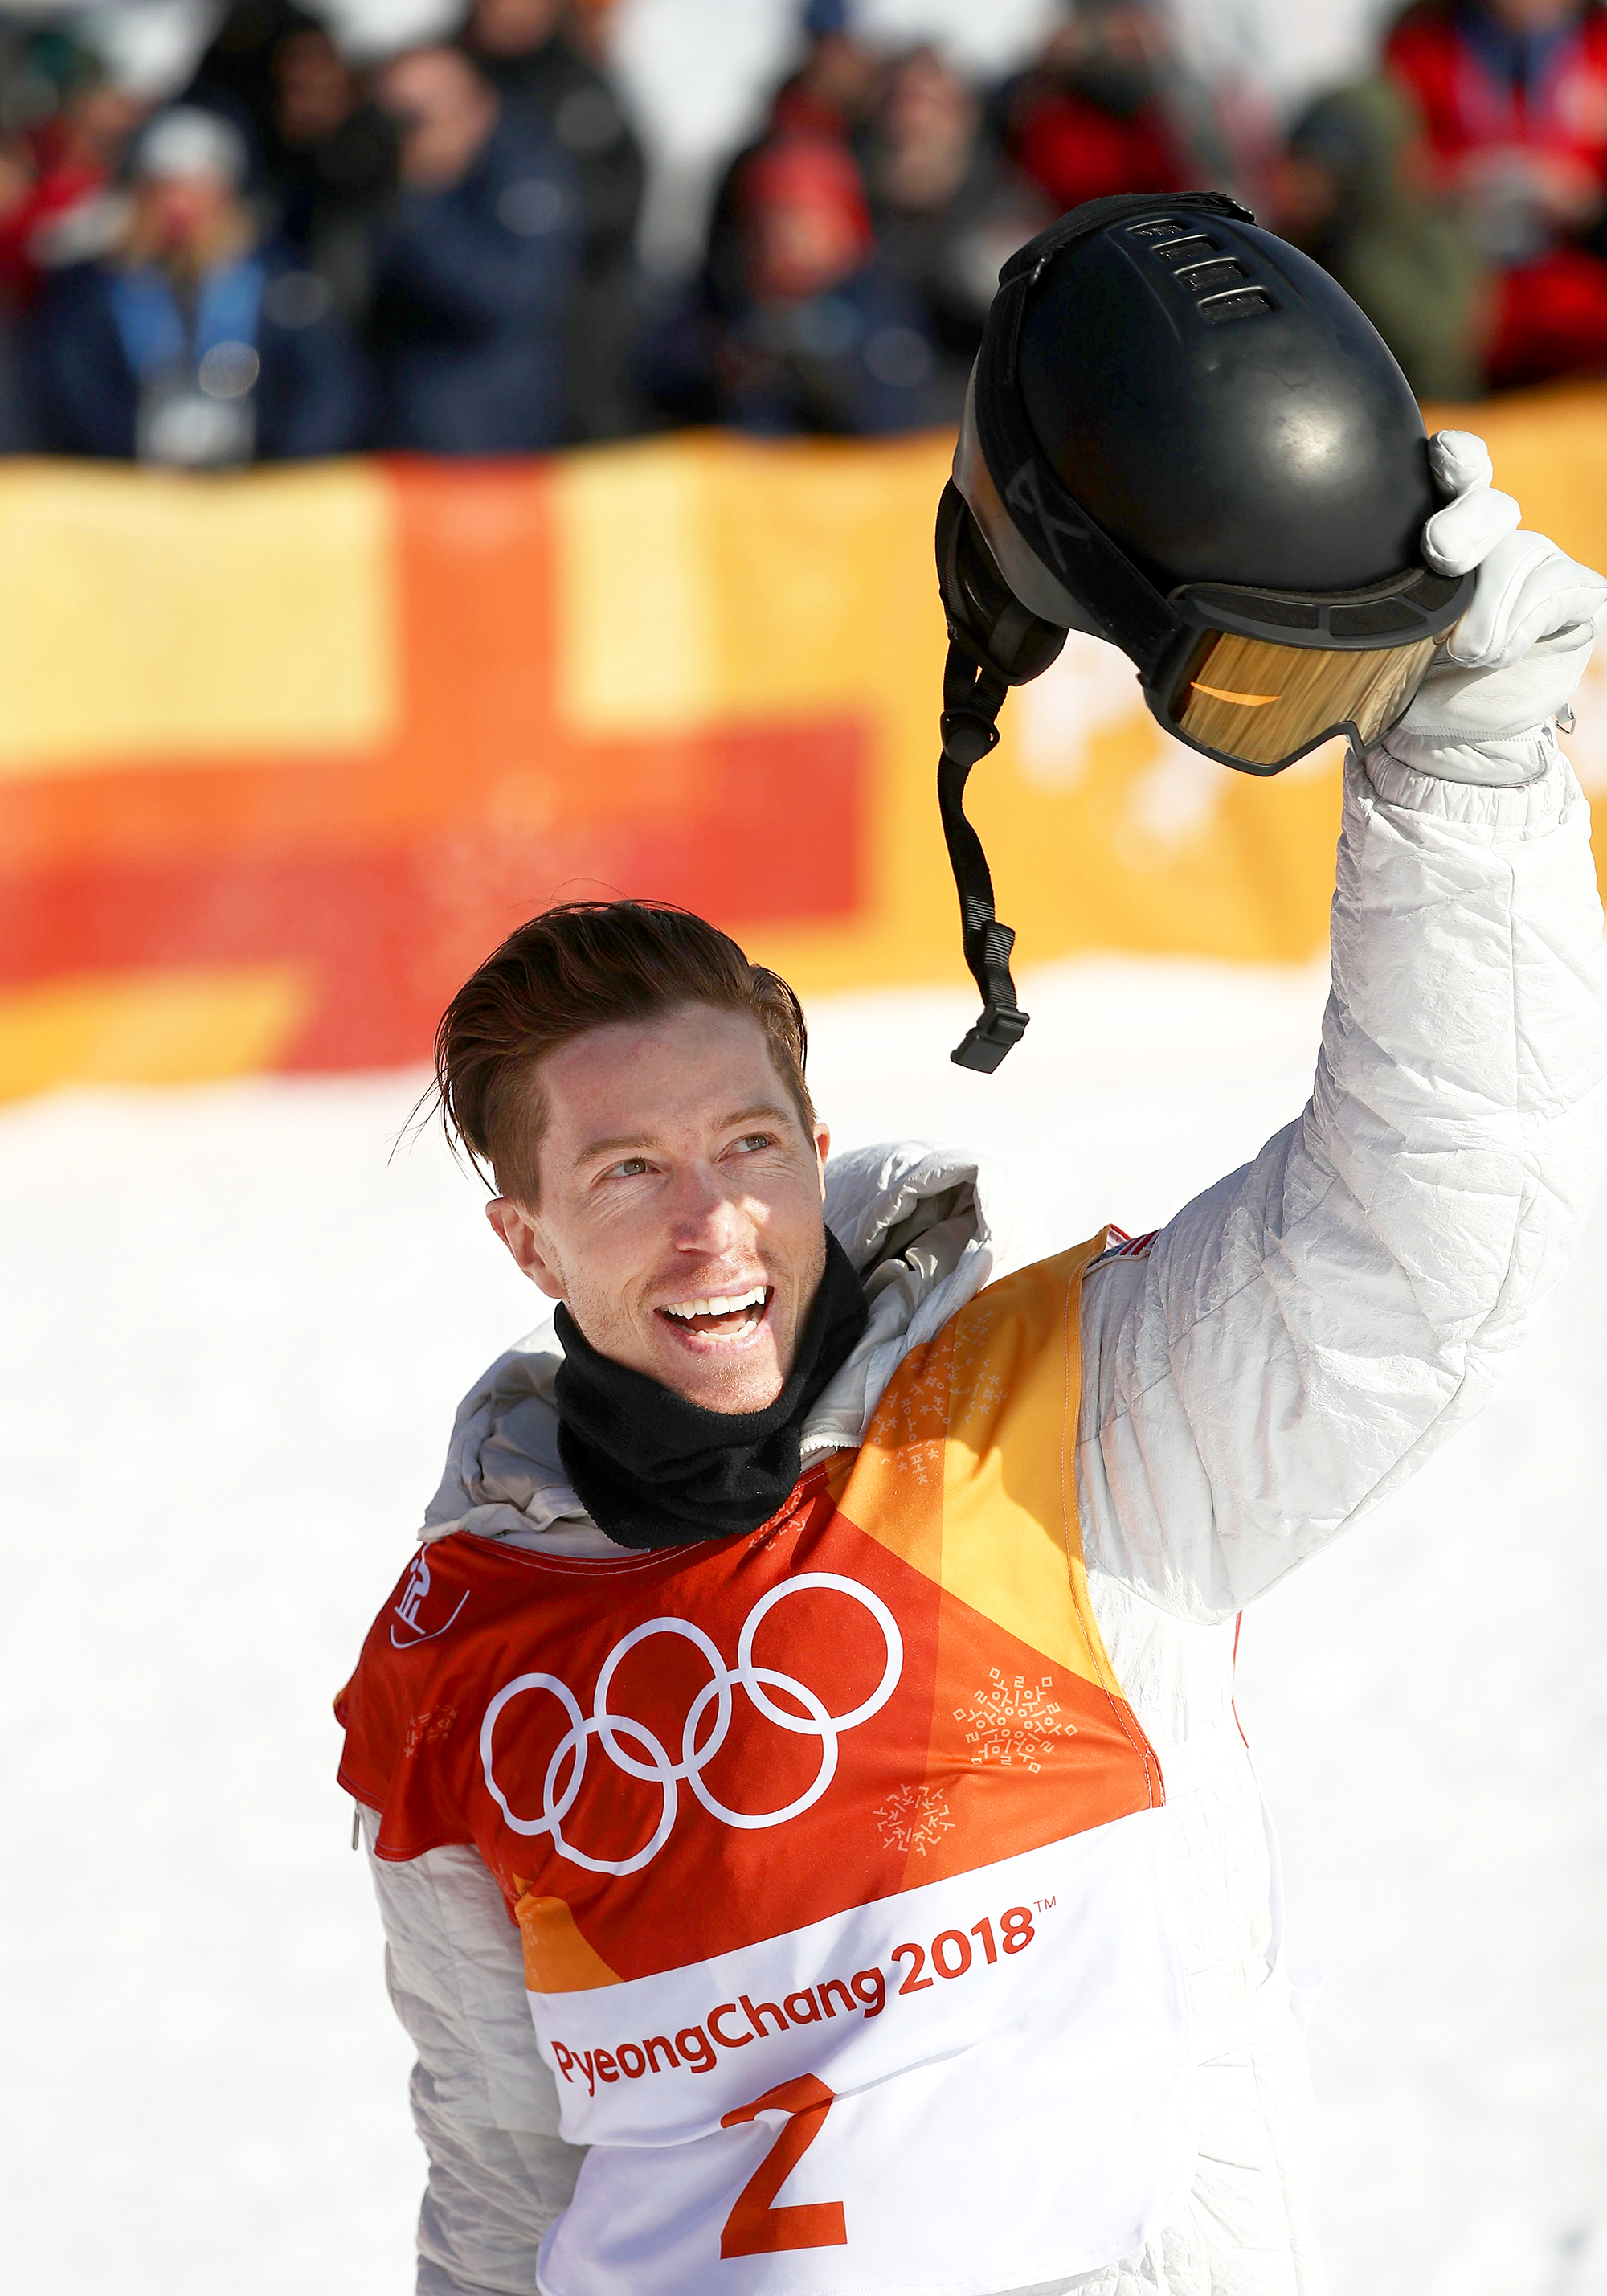 Shaun White Qualifies for Halfpipe Final in 2018 Winter Olympics: Watch